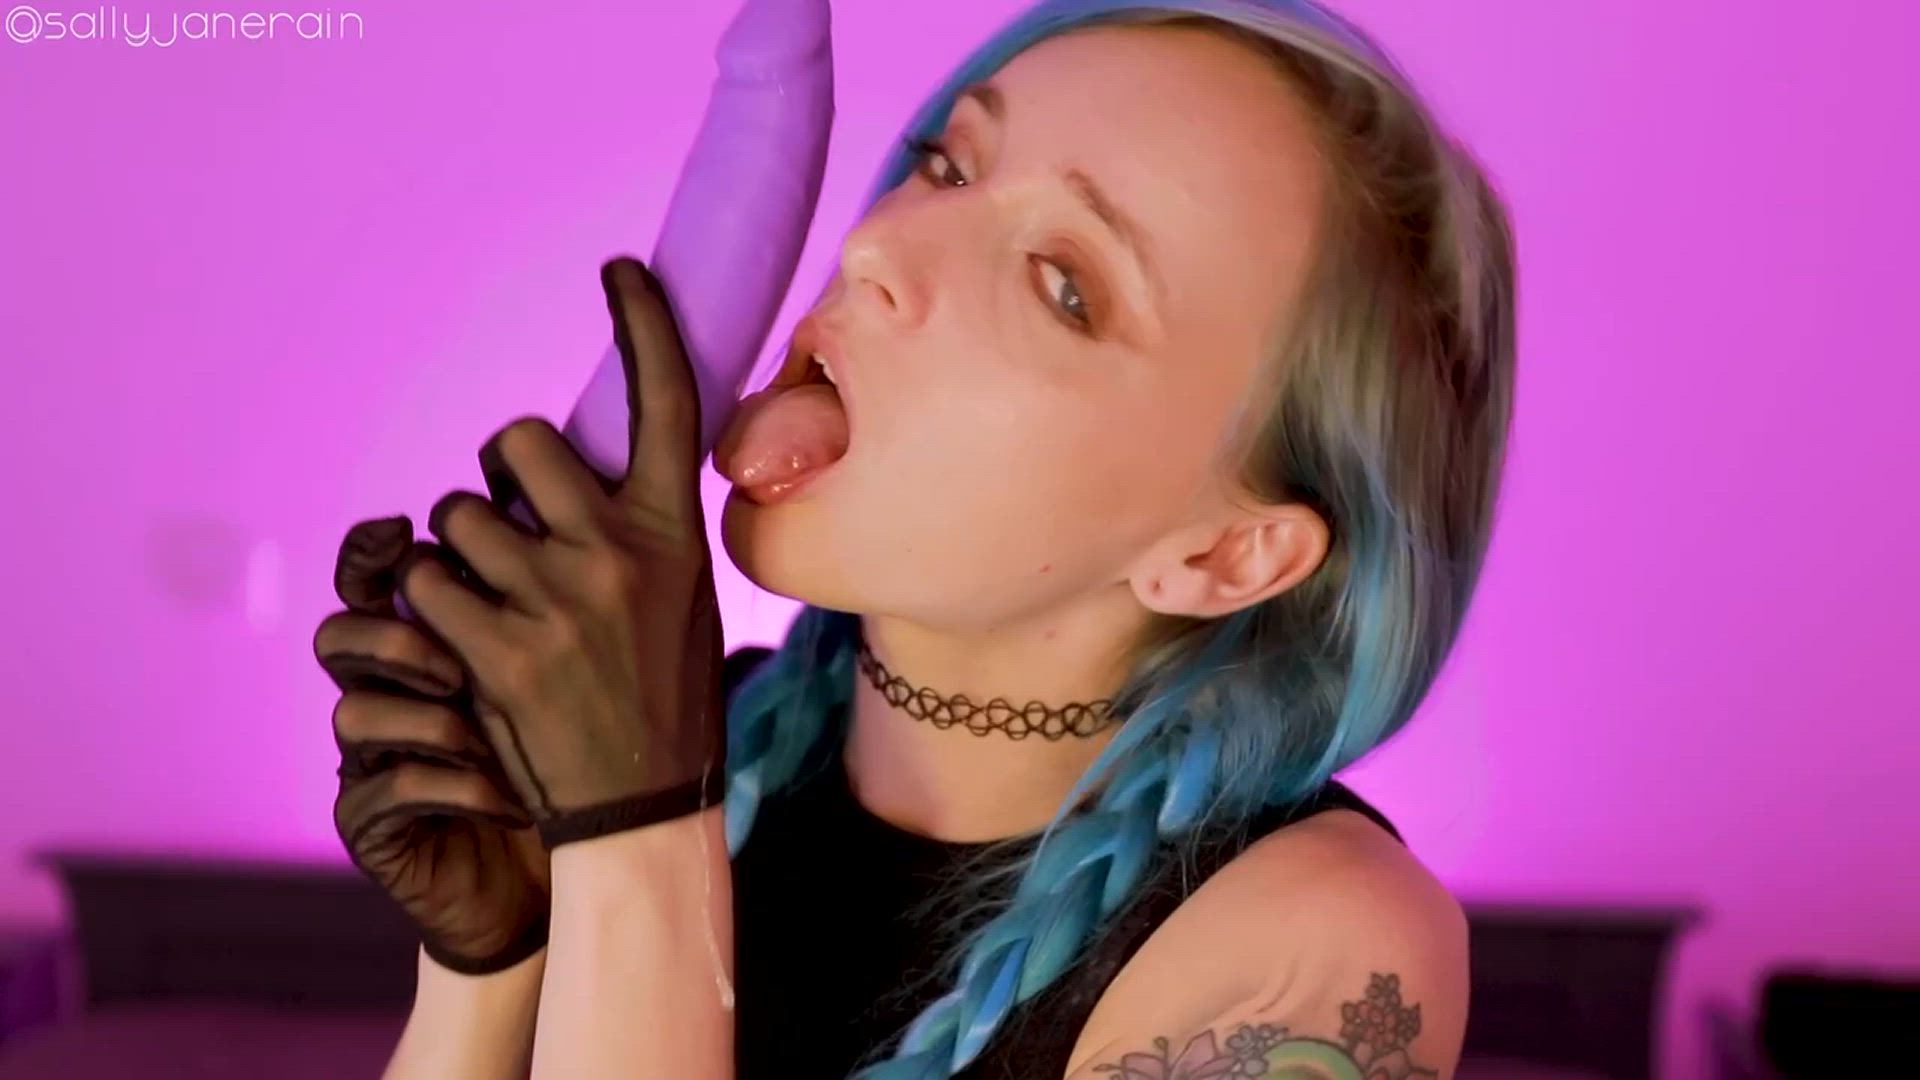 Blowjob porn video with onlyfans model sallyjanerain <strong>@sallyjanerain</strong>